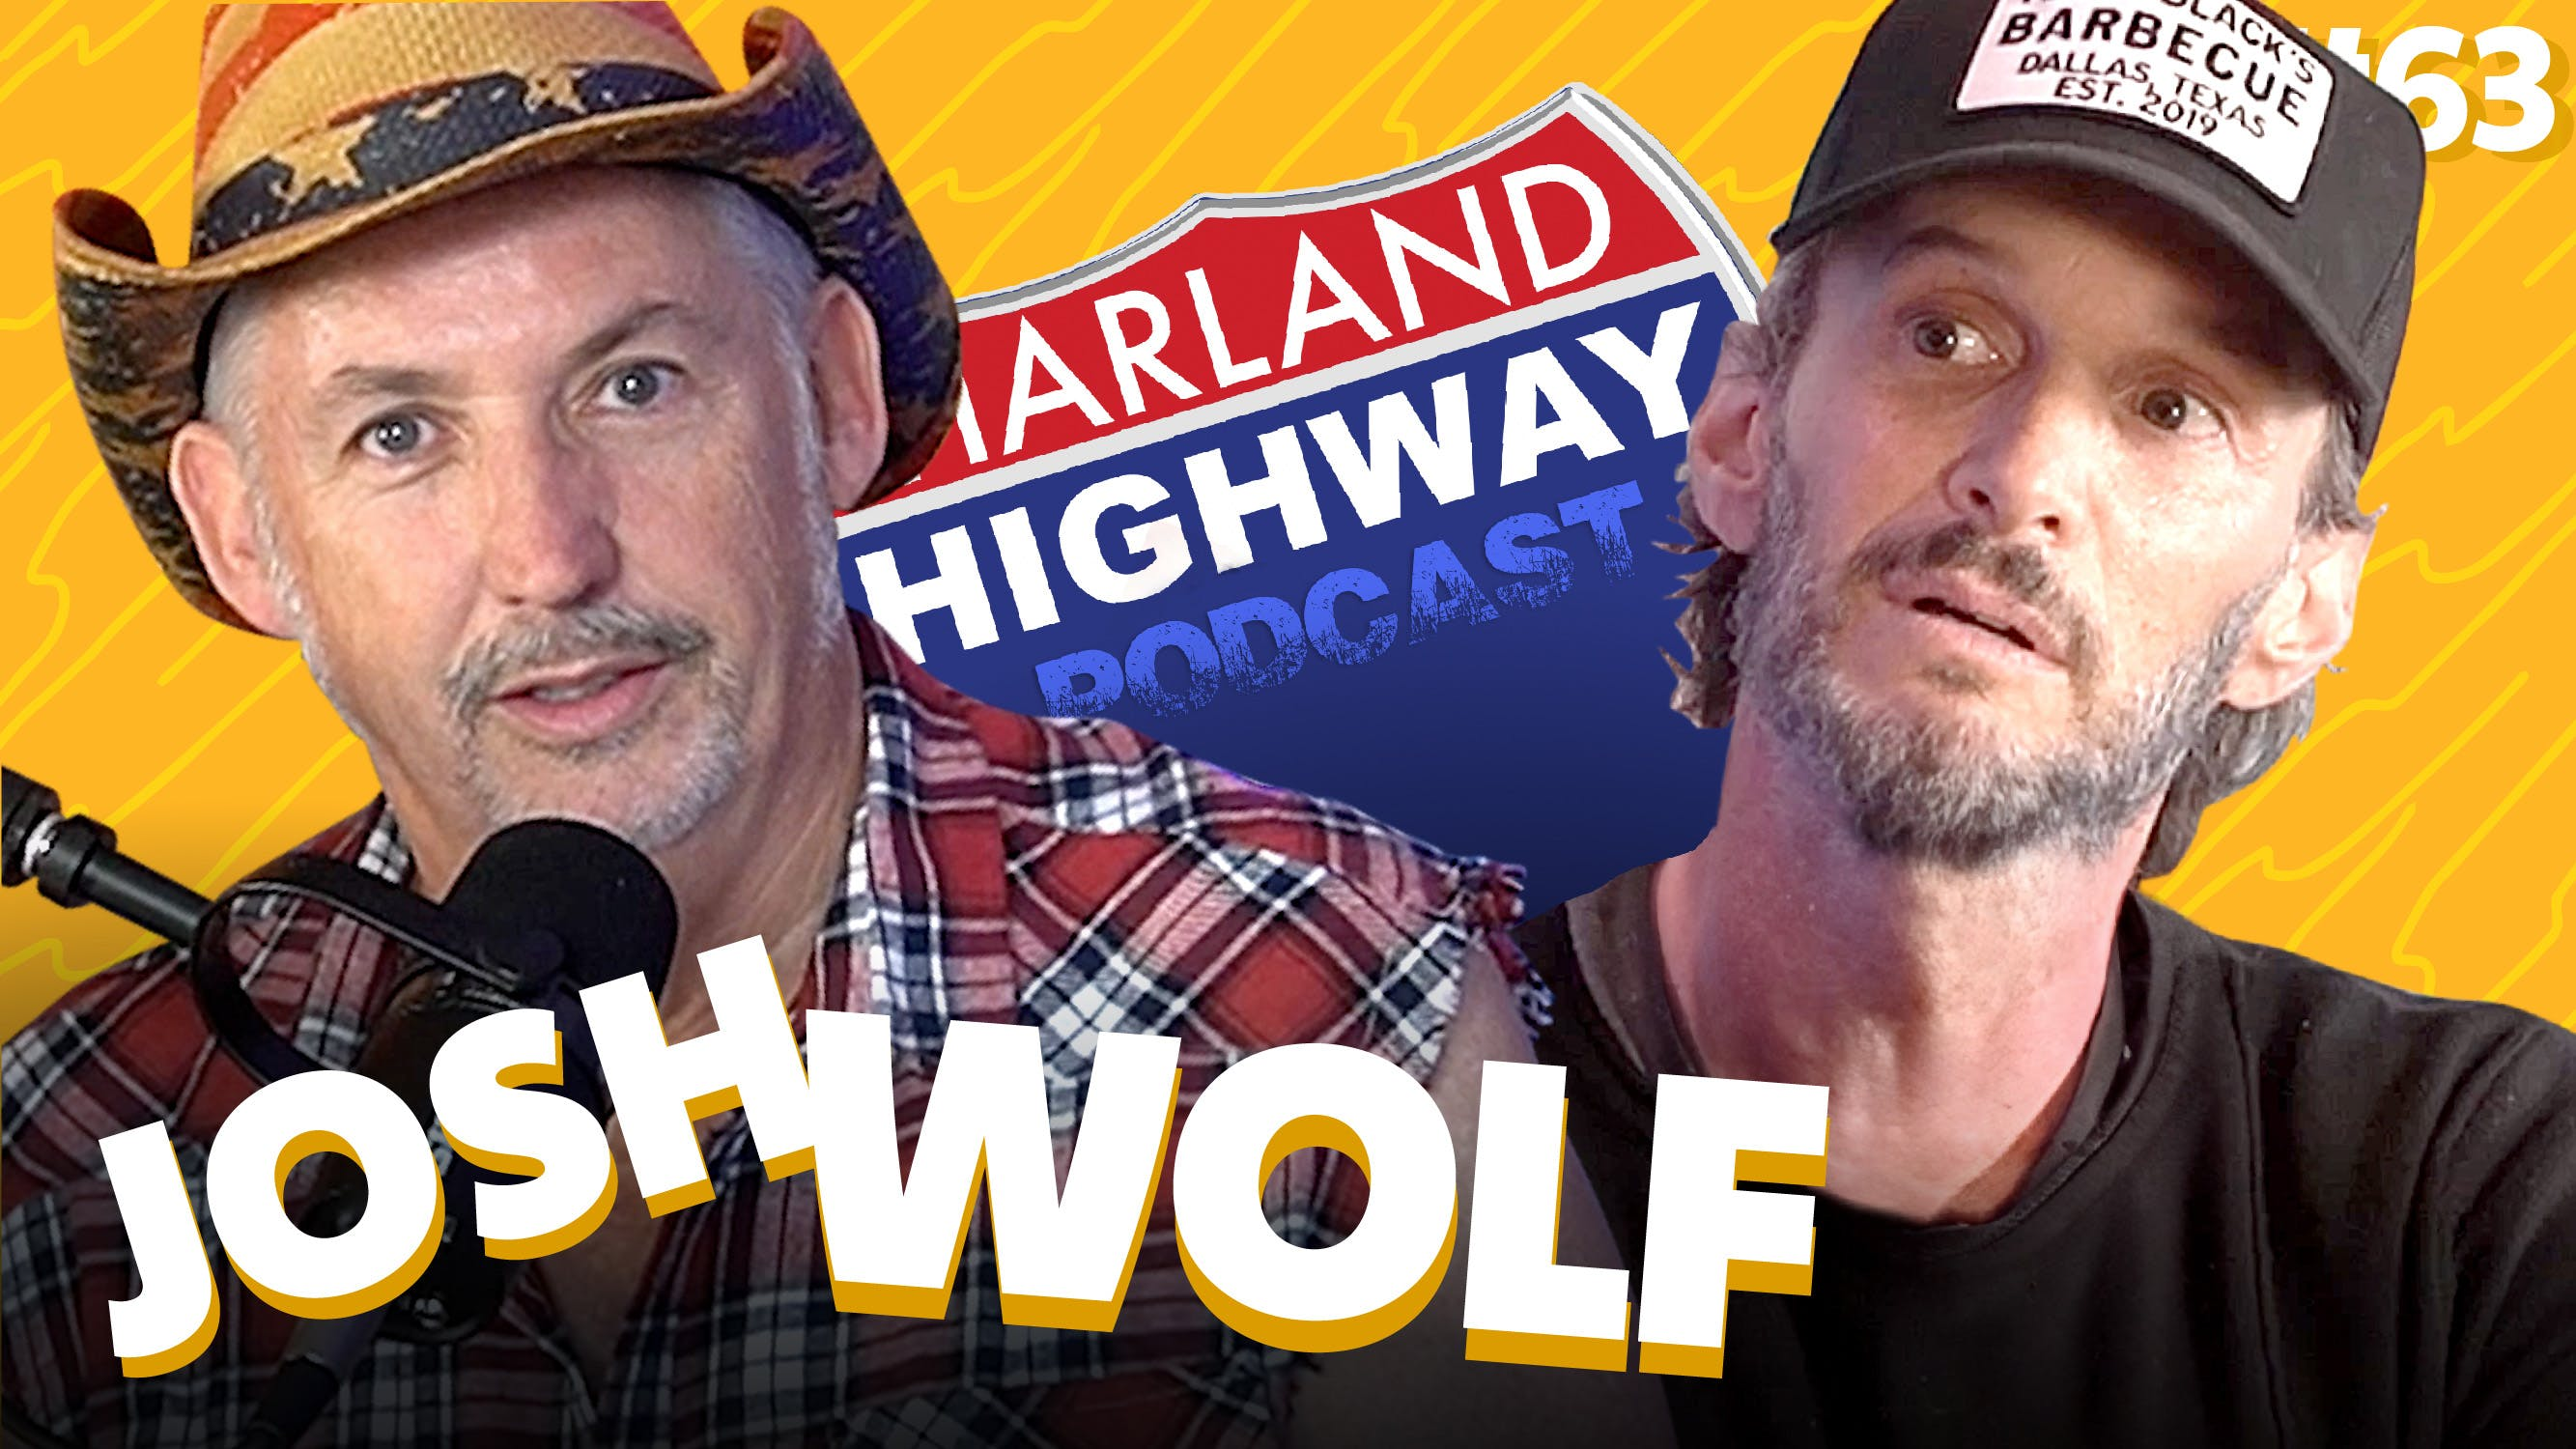 NEW HARLAND HIGHWAY #63 - JOSH WOLF, Comedian, Podcaster, Writer.